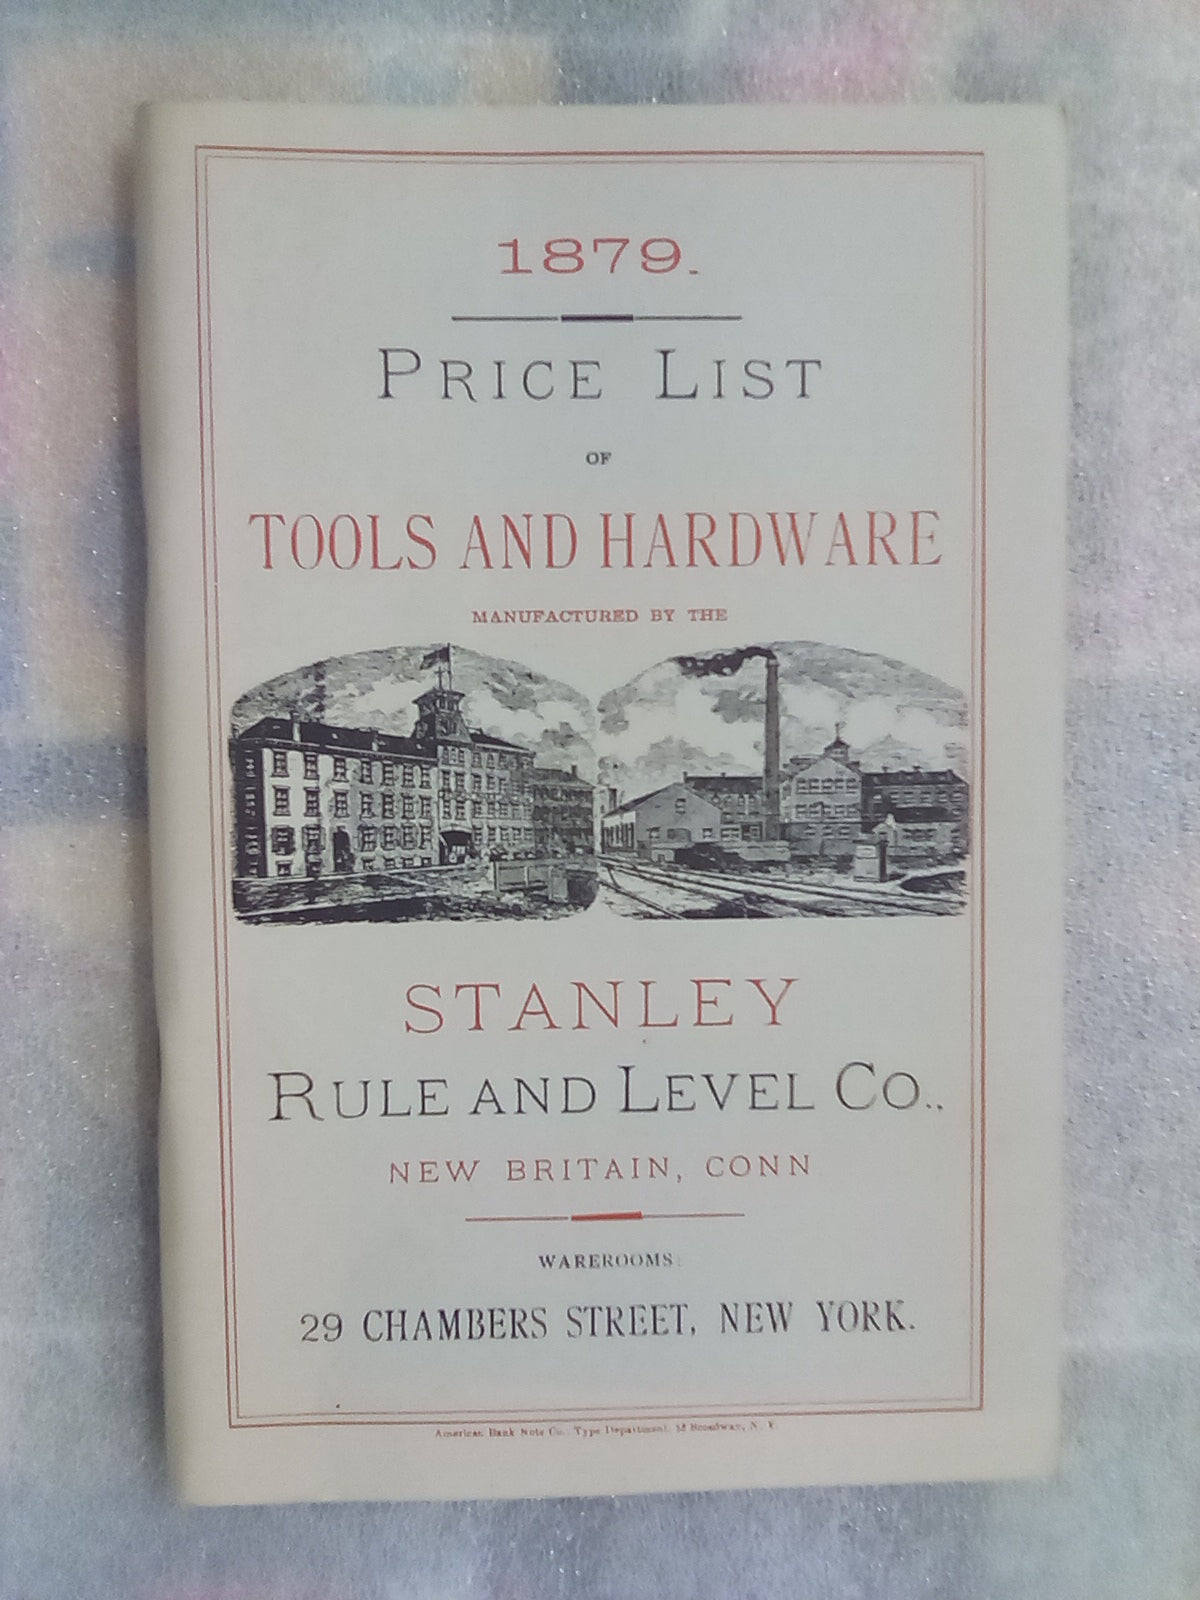 (Reprinted) Stanley Rule & Level Co. Price list 1864 to 1888 - 8 Volumes